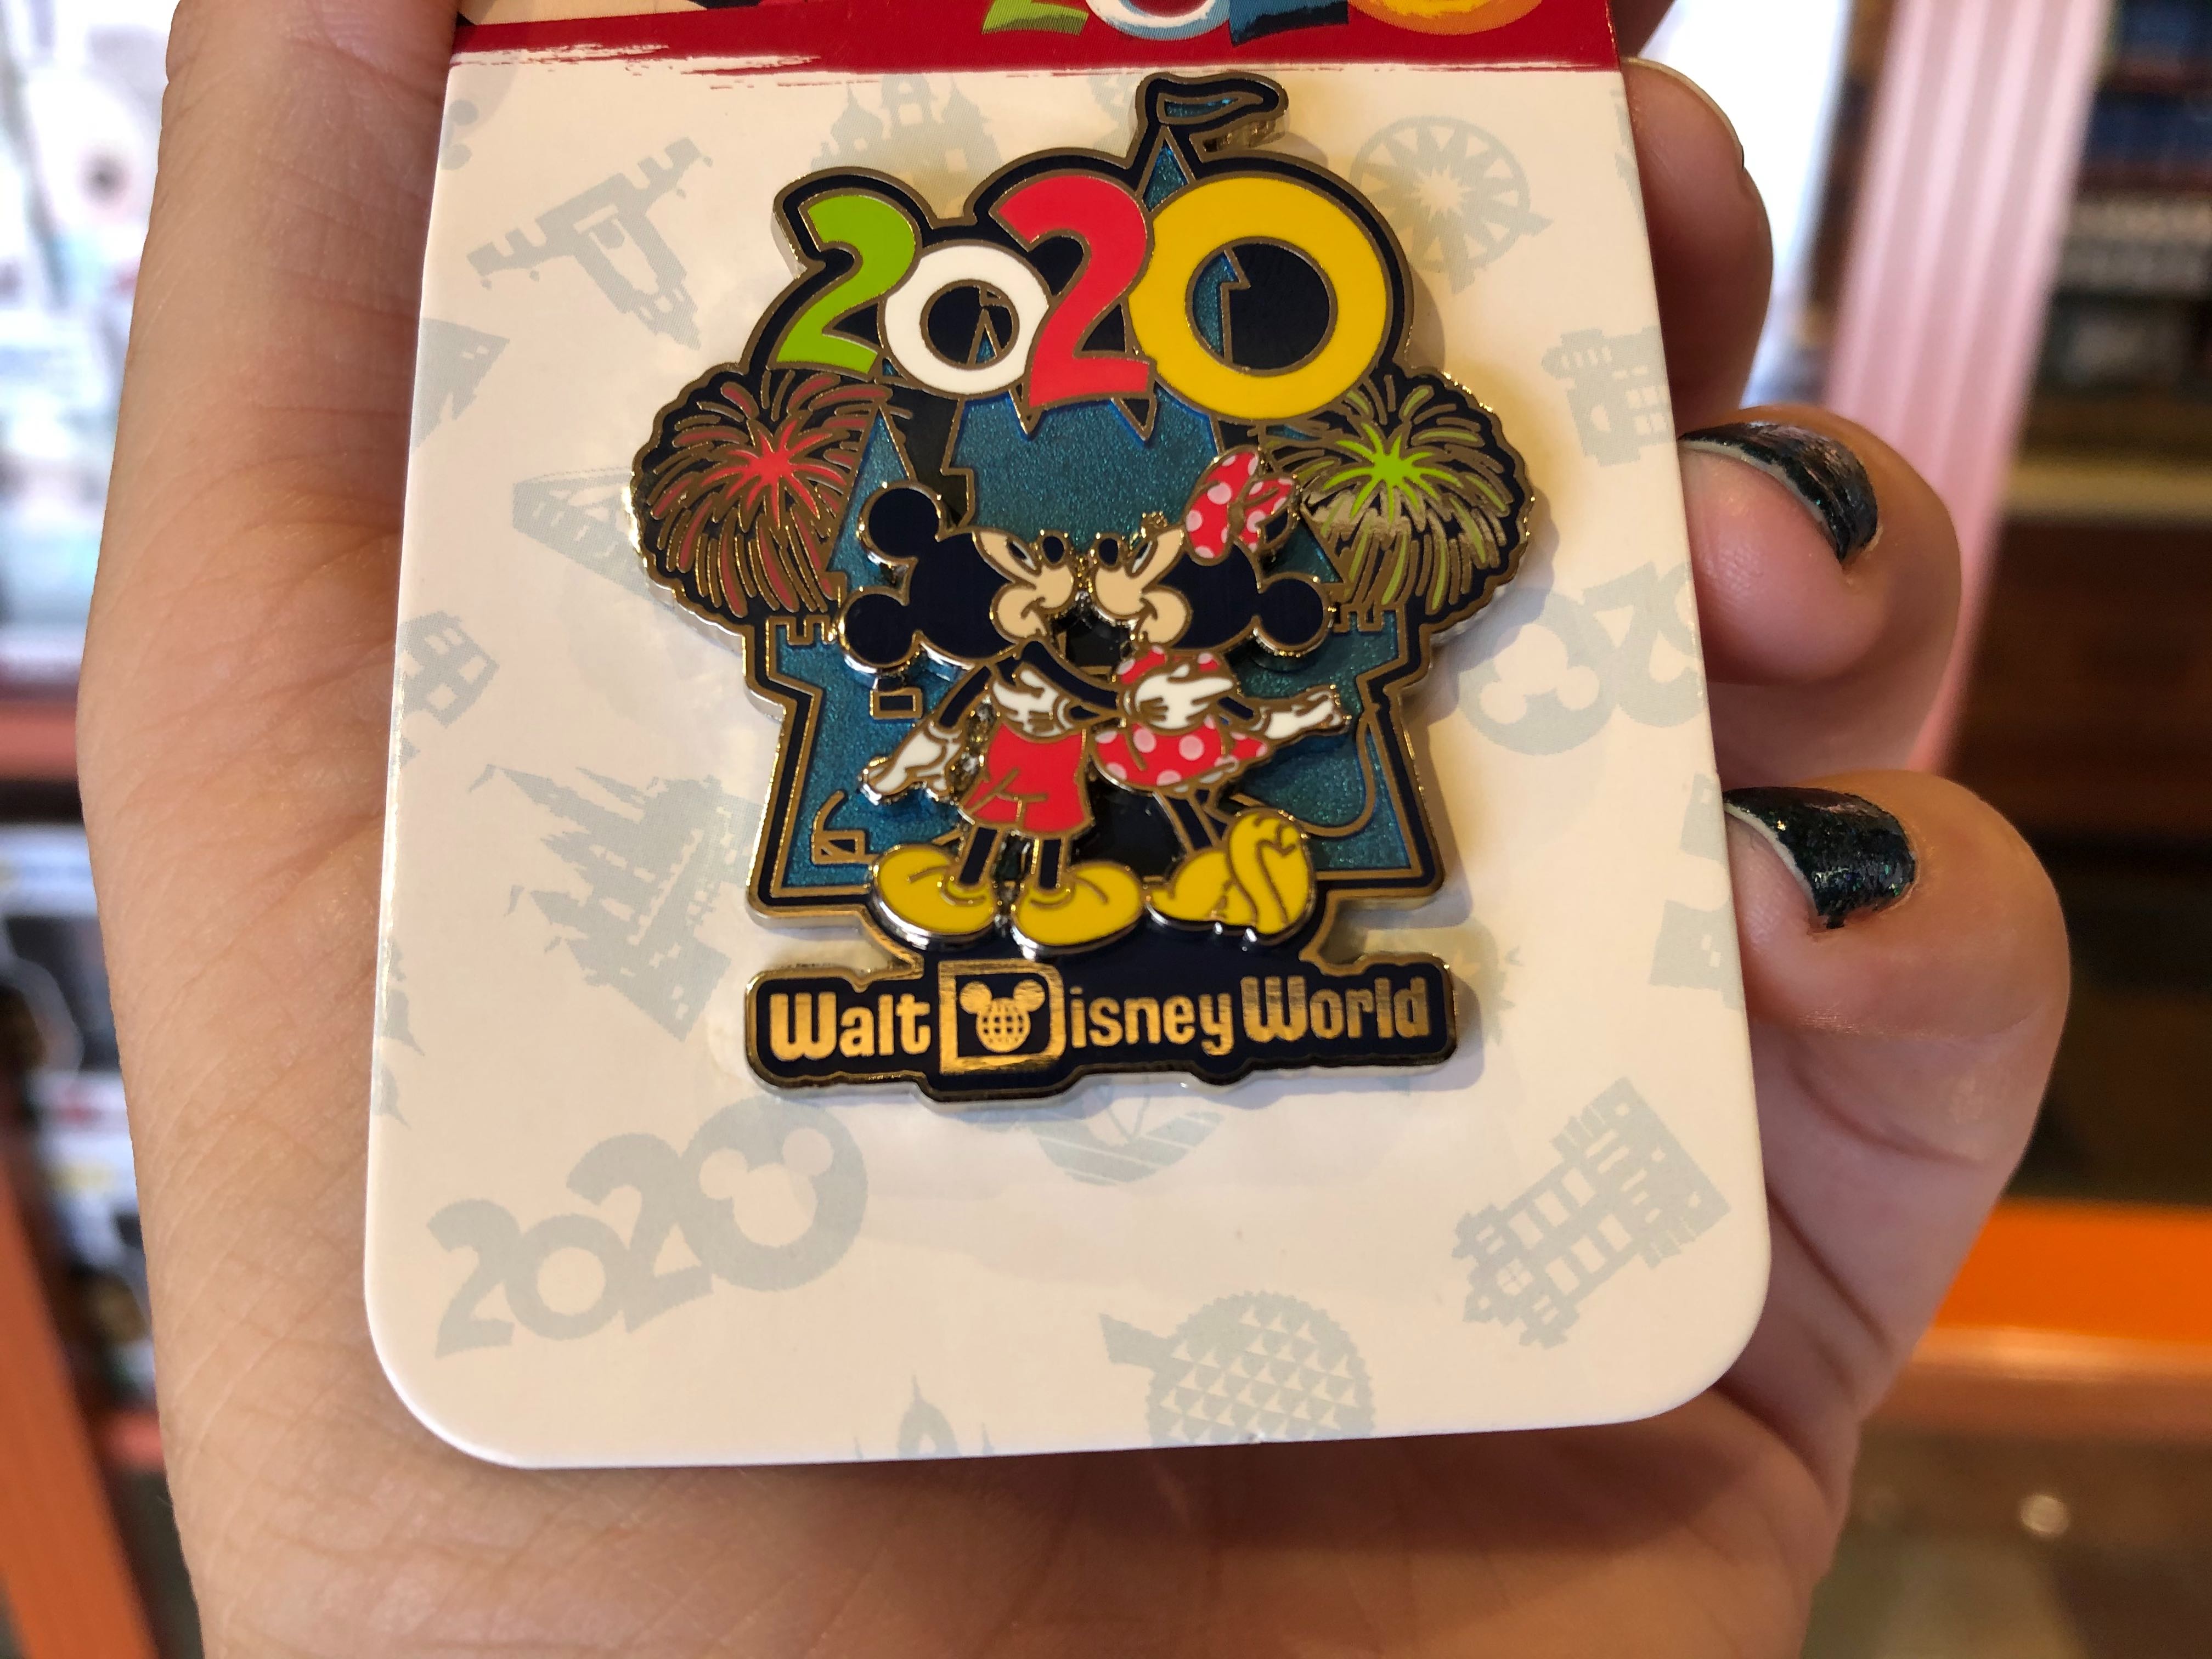 PHOTOS: New Park Specific 2020 Logo Trading Pins Debut at Walt Disney World - WDW News Today